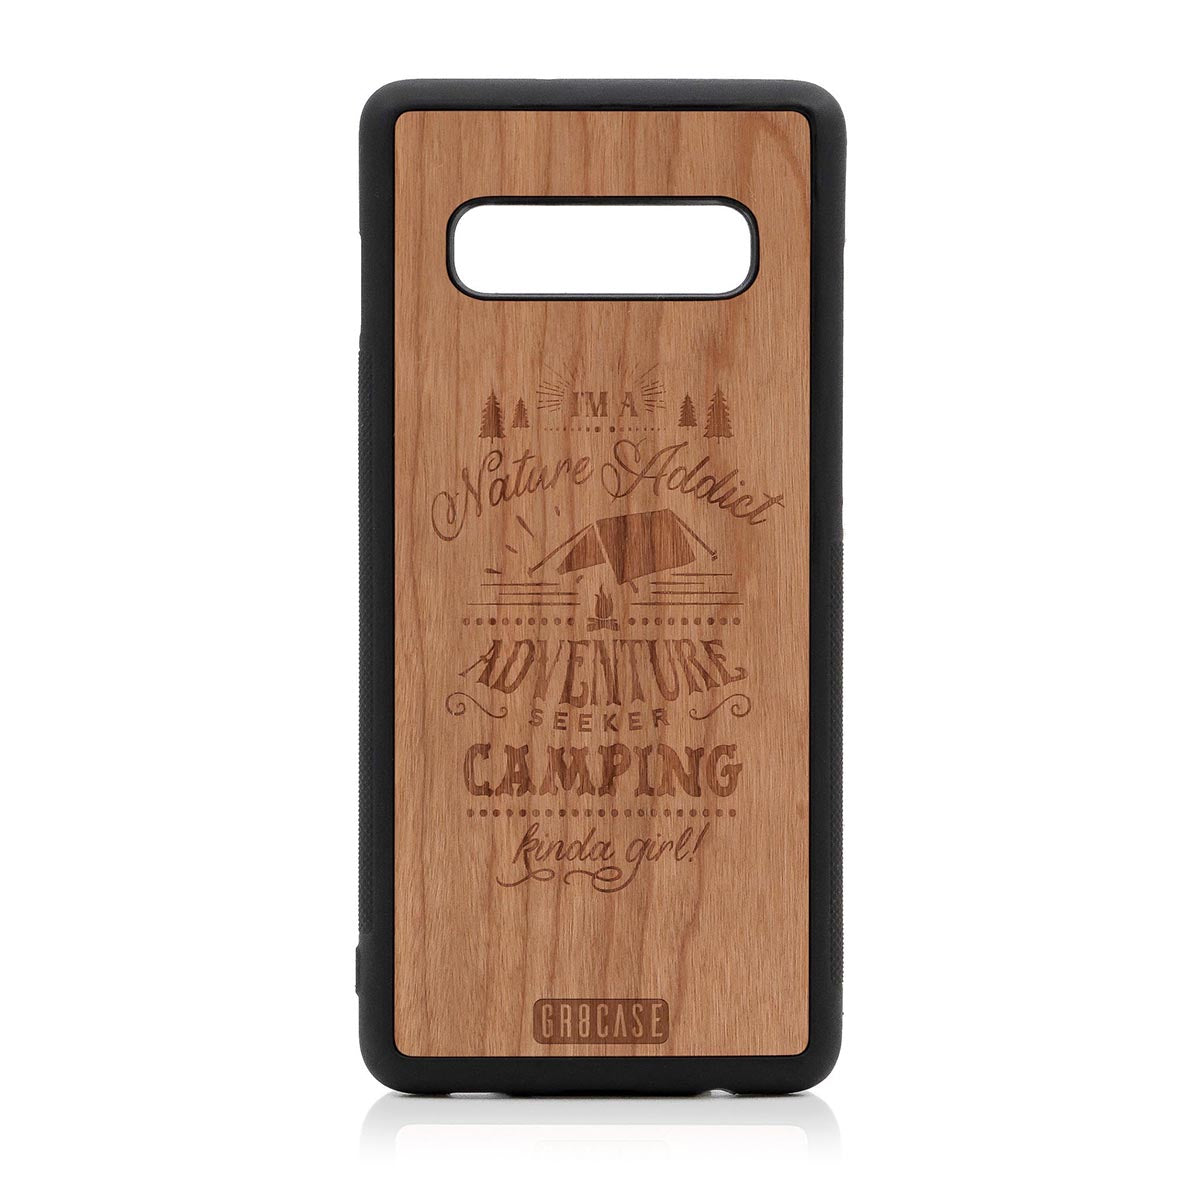 I'm A Nature Addict Adventure Seeker Camping Kinda Girl Design Wood Case Samsung Galaxy S10 Plus by GR8CASE